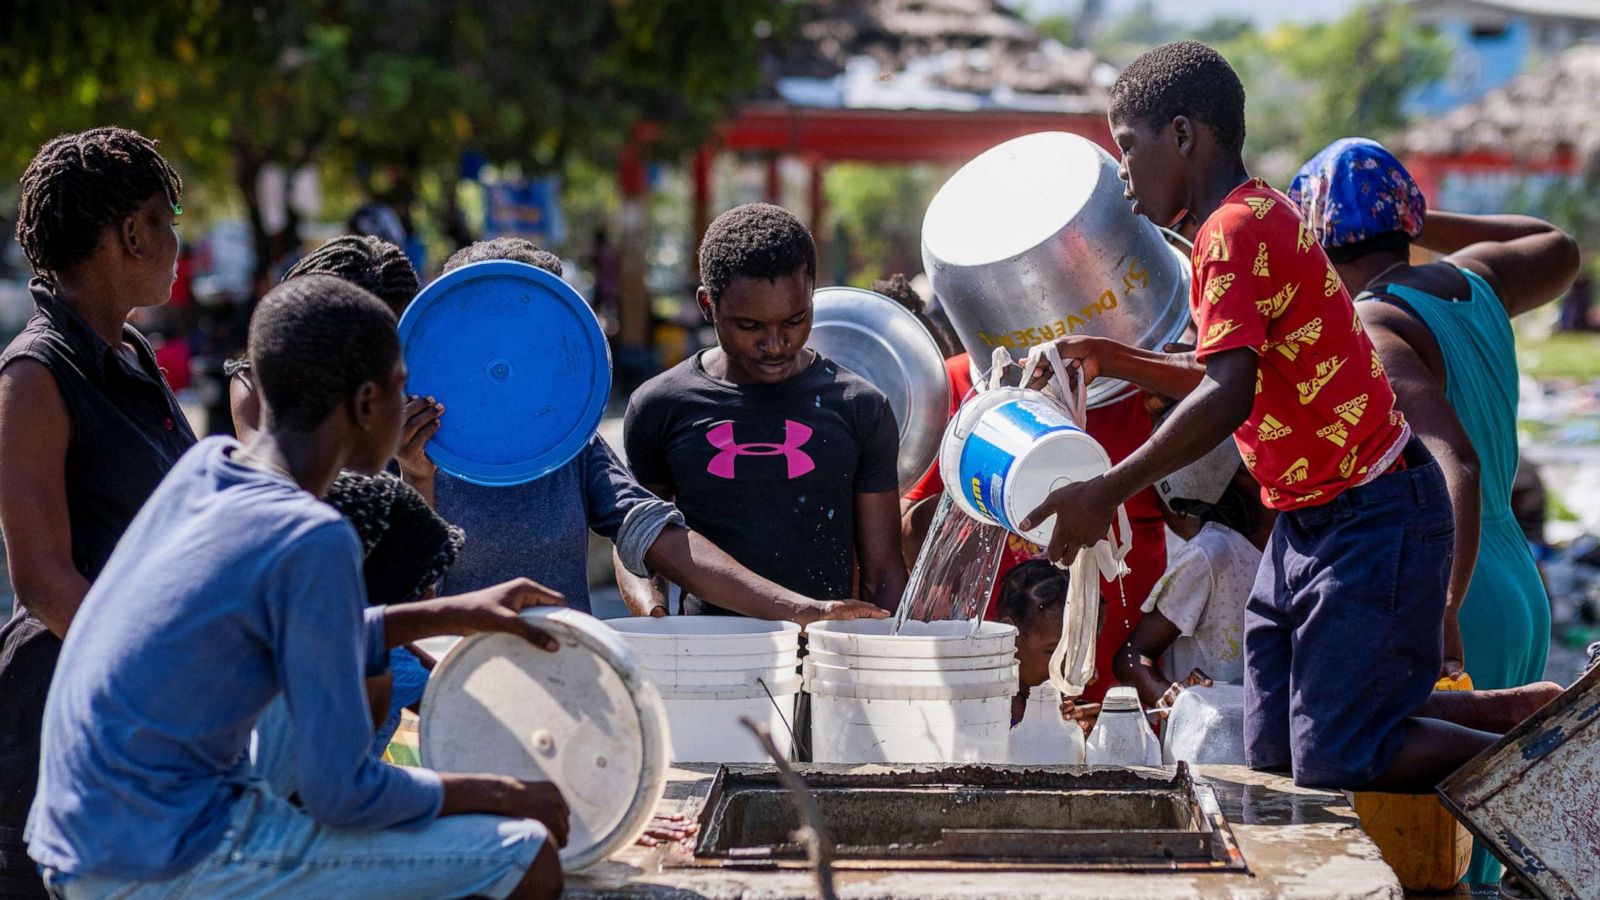 Citizens in Haiti getting water out of a well due to the ongoing cholera epidemic